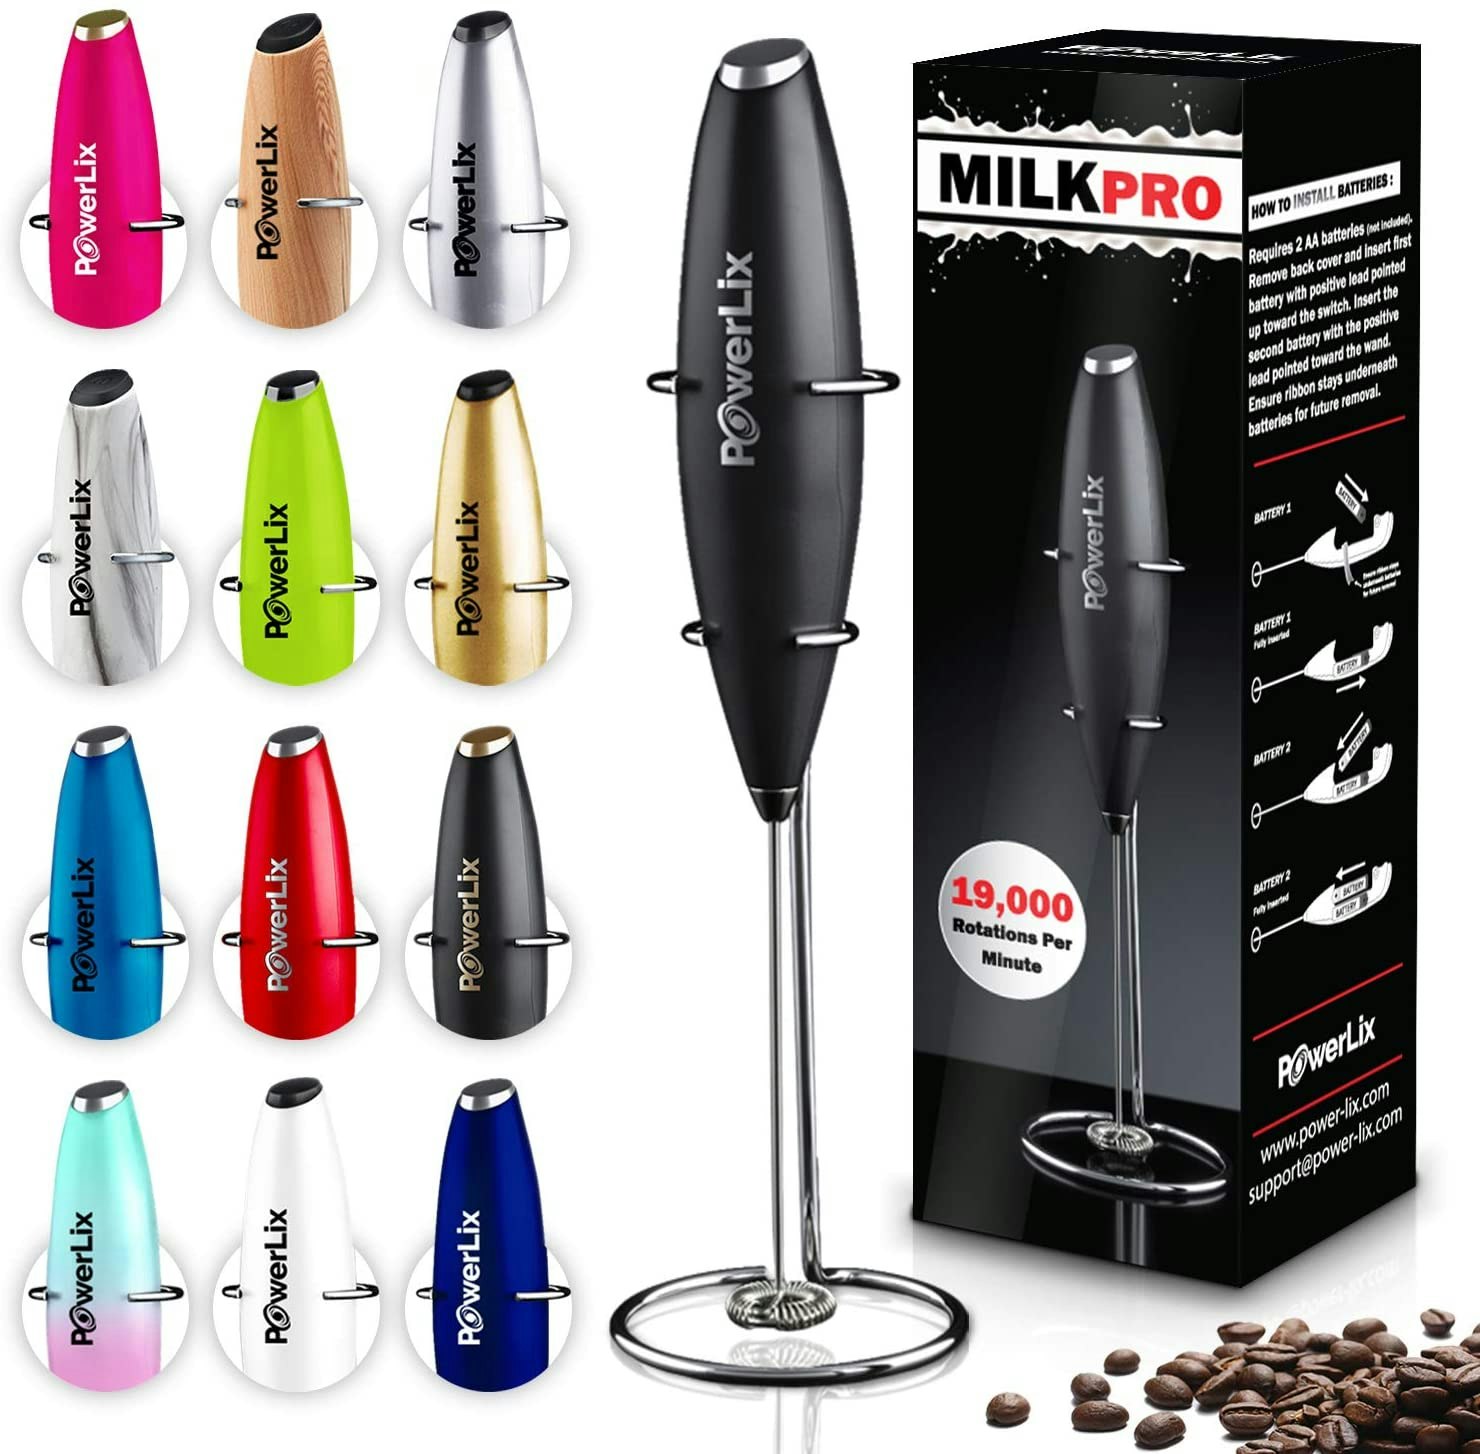 The PowerLix Milk Frother comes in a variety of colors and is easy to throw in your backpack or suitcase for camping or travel